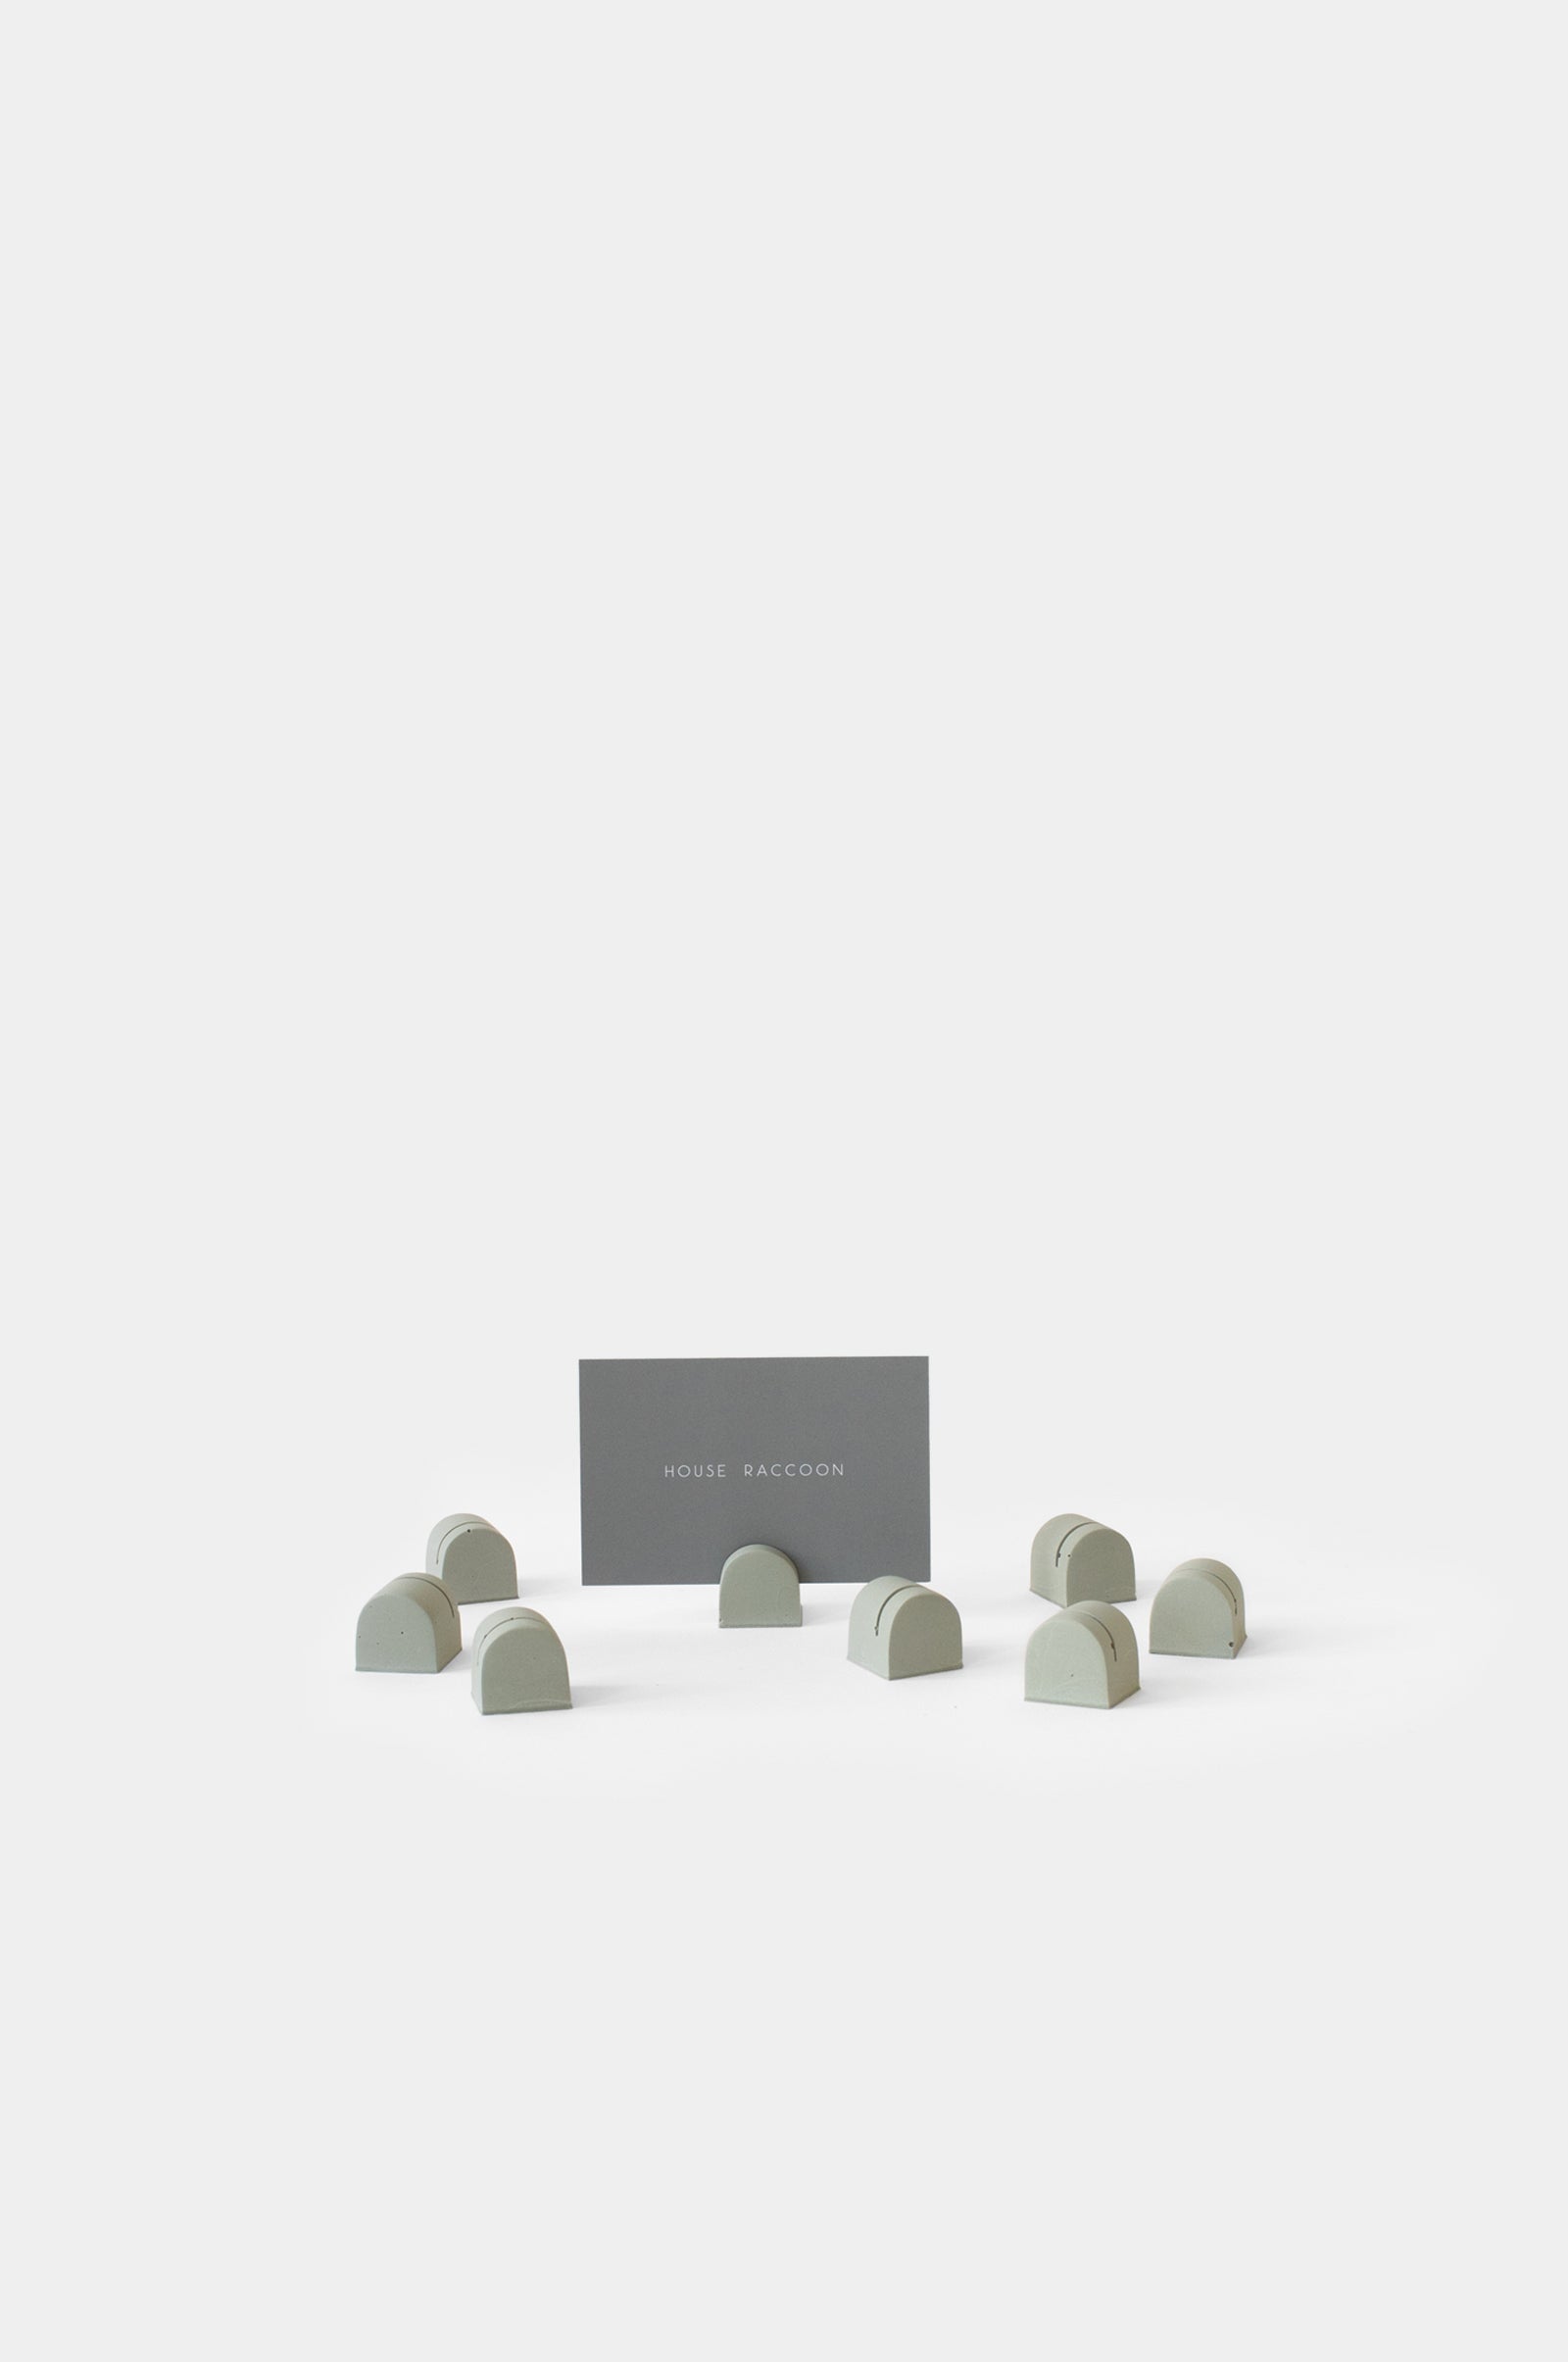 Card Holders Bobby - Small (8x) Stationery House Raccoon Olive Green 